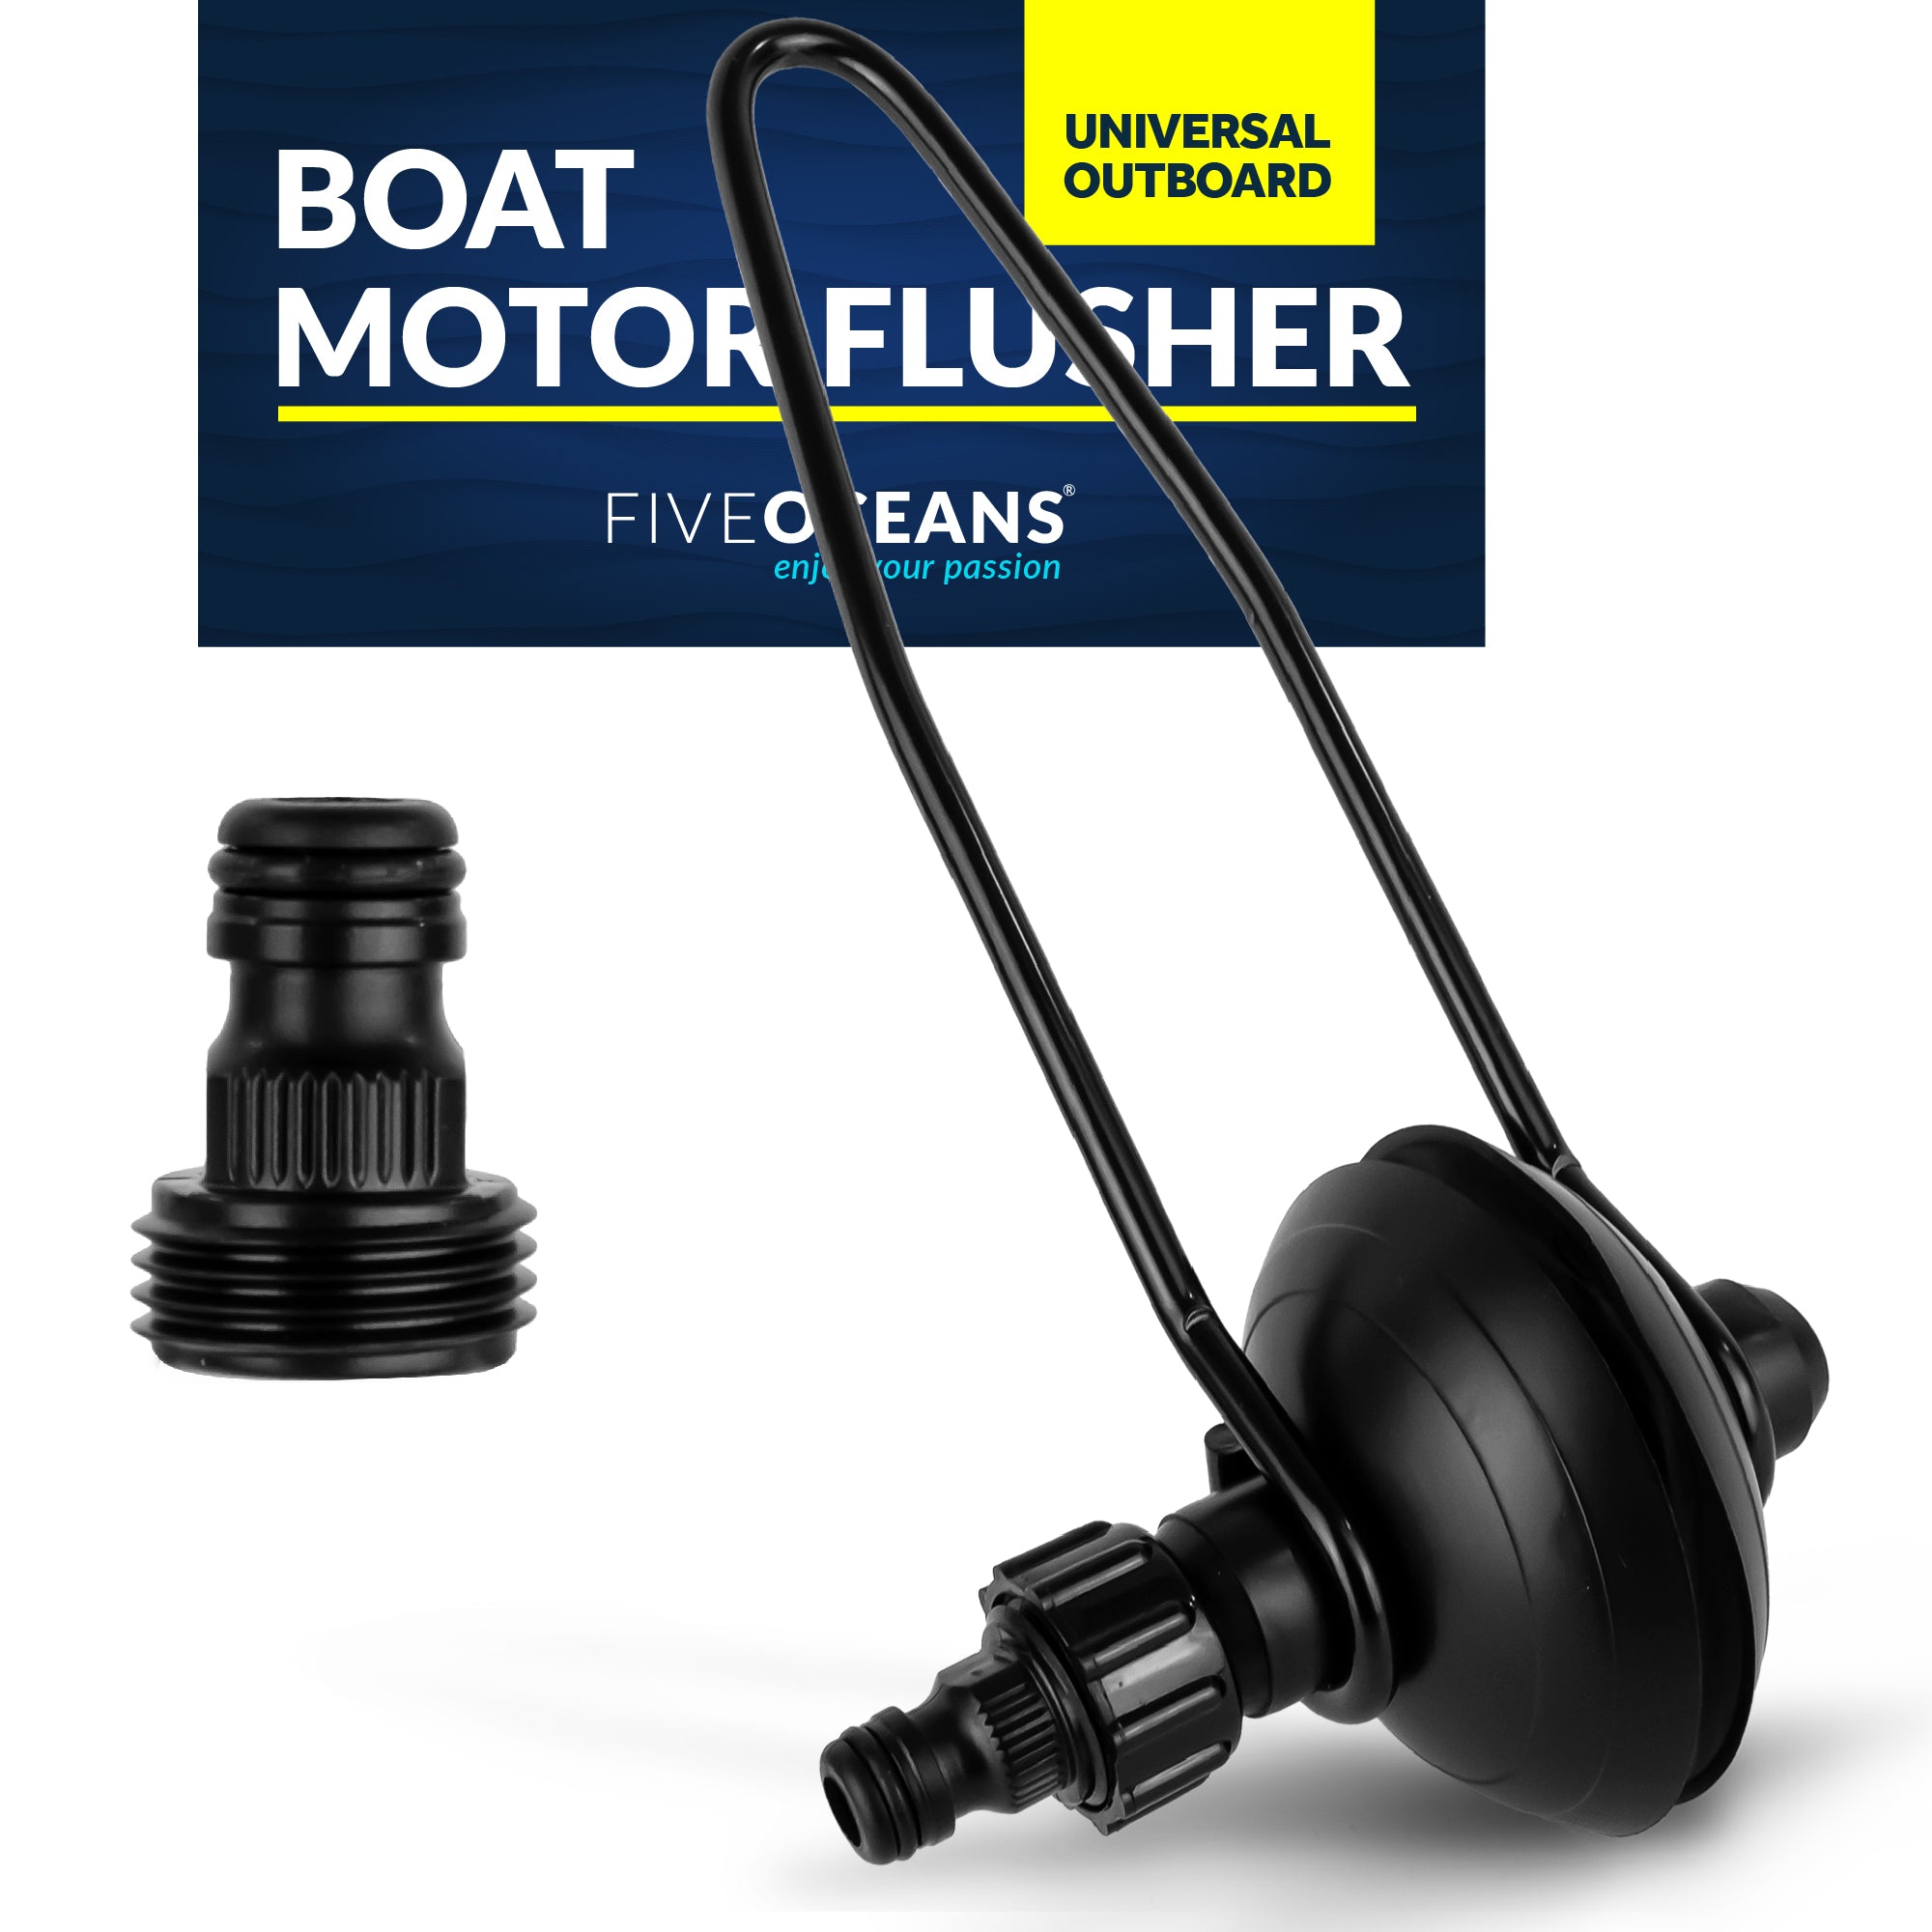 Outboard Motor Muffs- FO1871